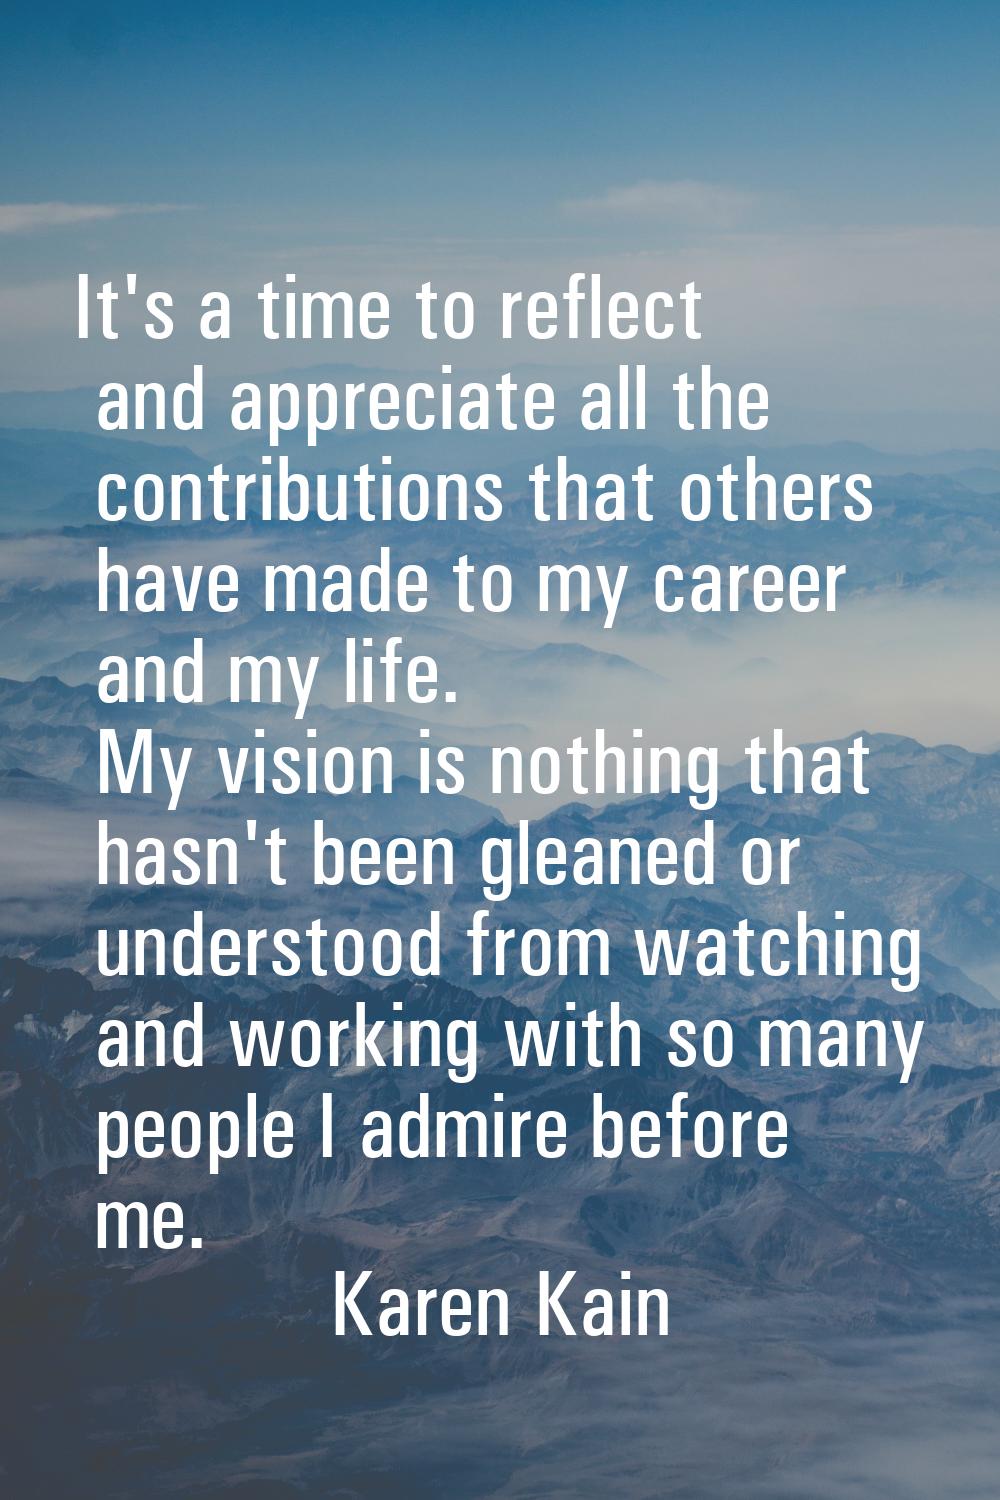 It's a time to reflect and appreciate all the contributions that others have made to my career and 